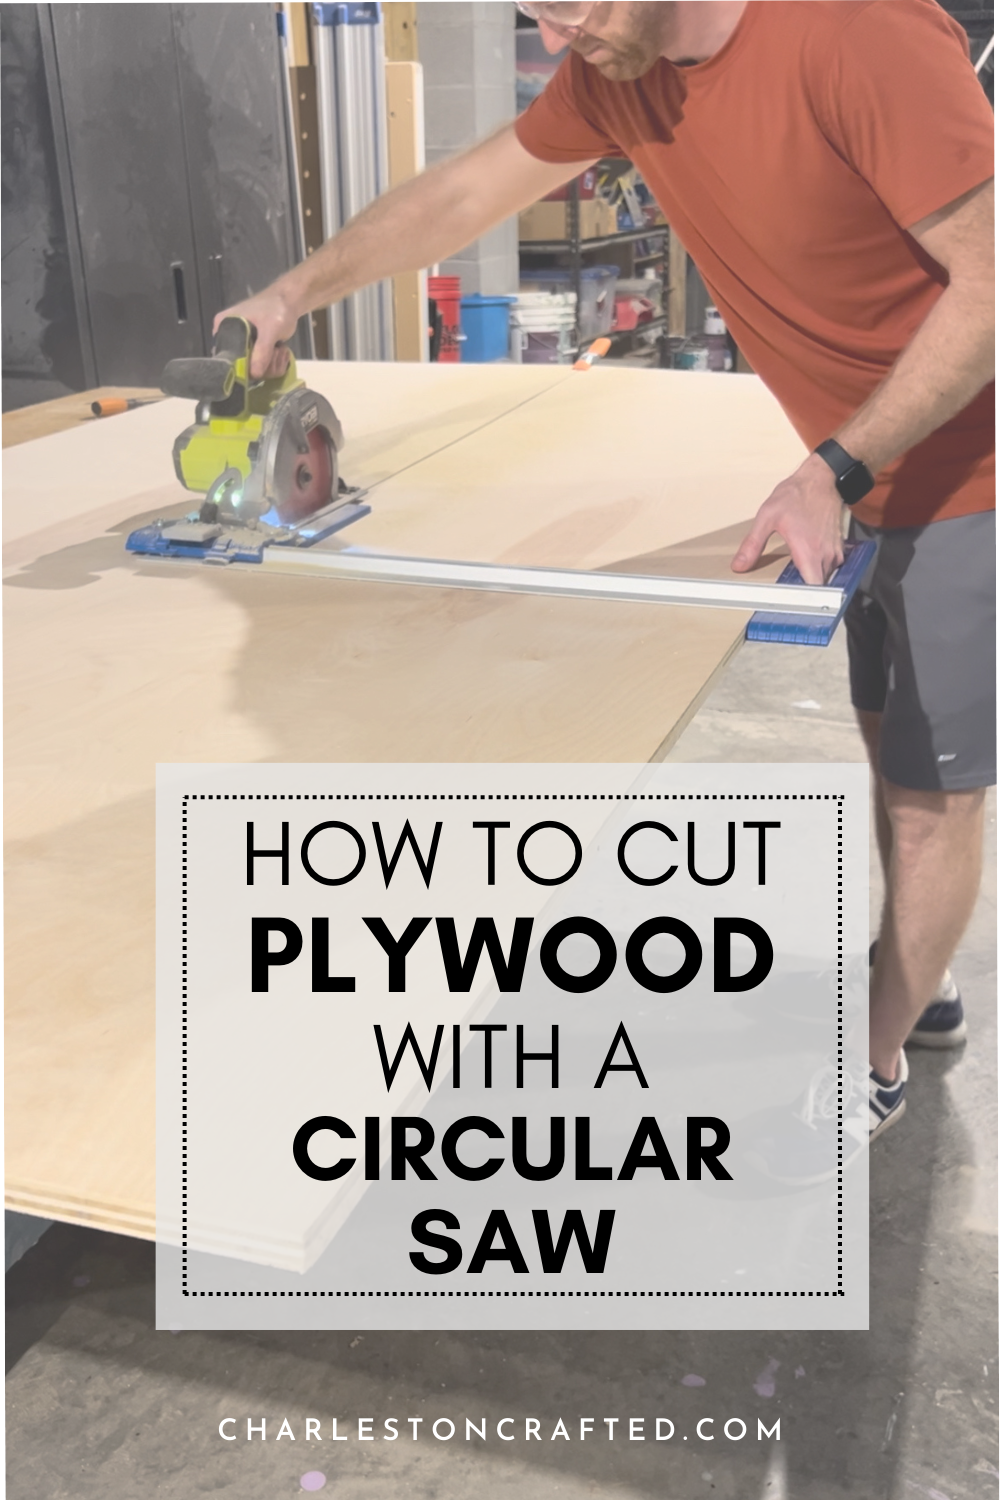 How to cut plywood with circular saw - Charleston Crafted